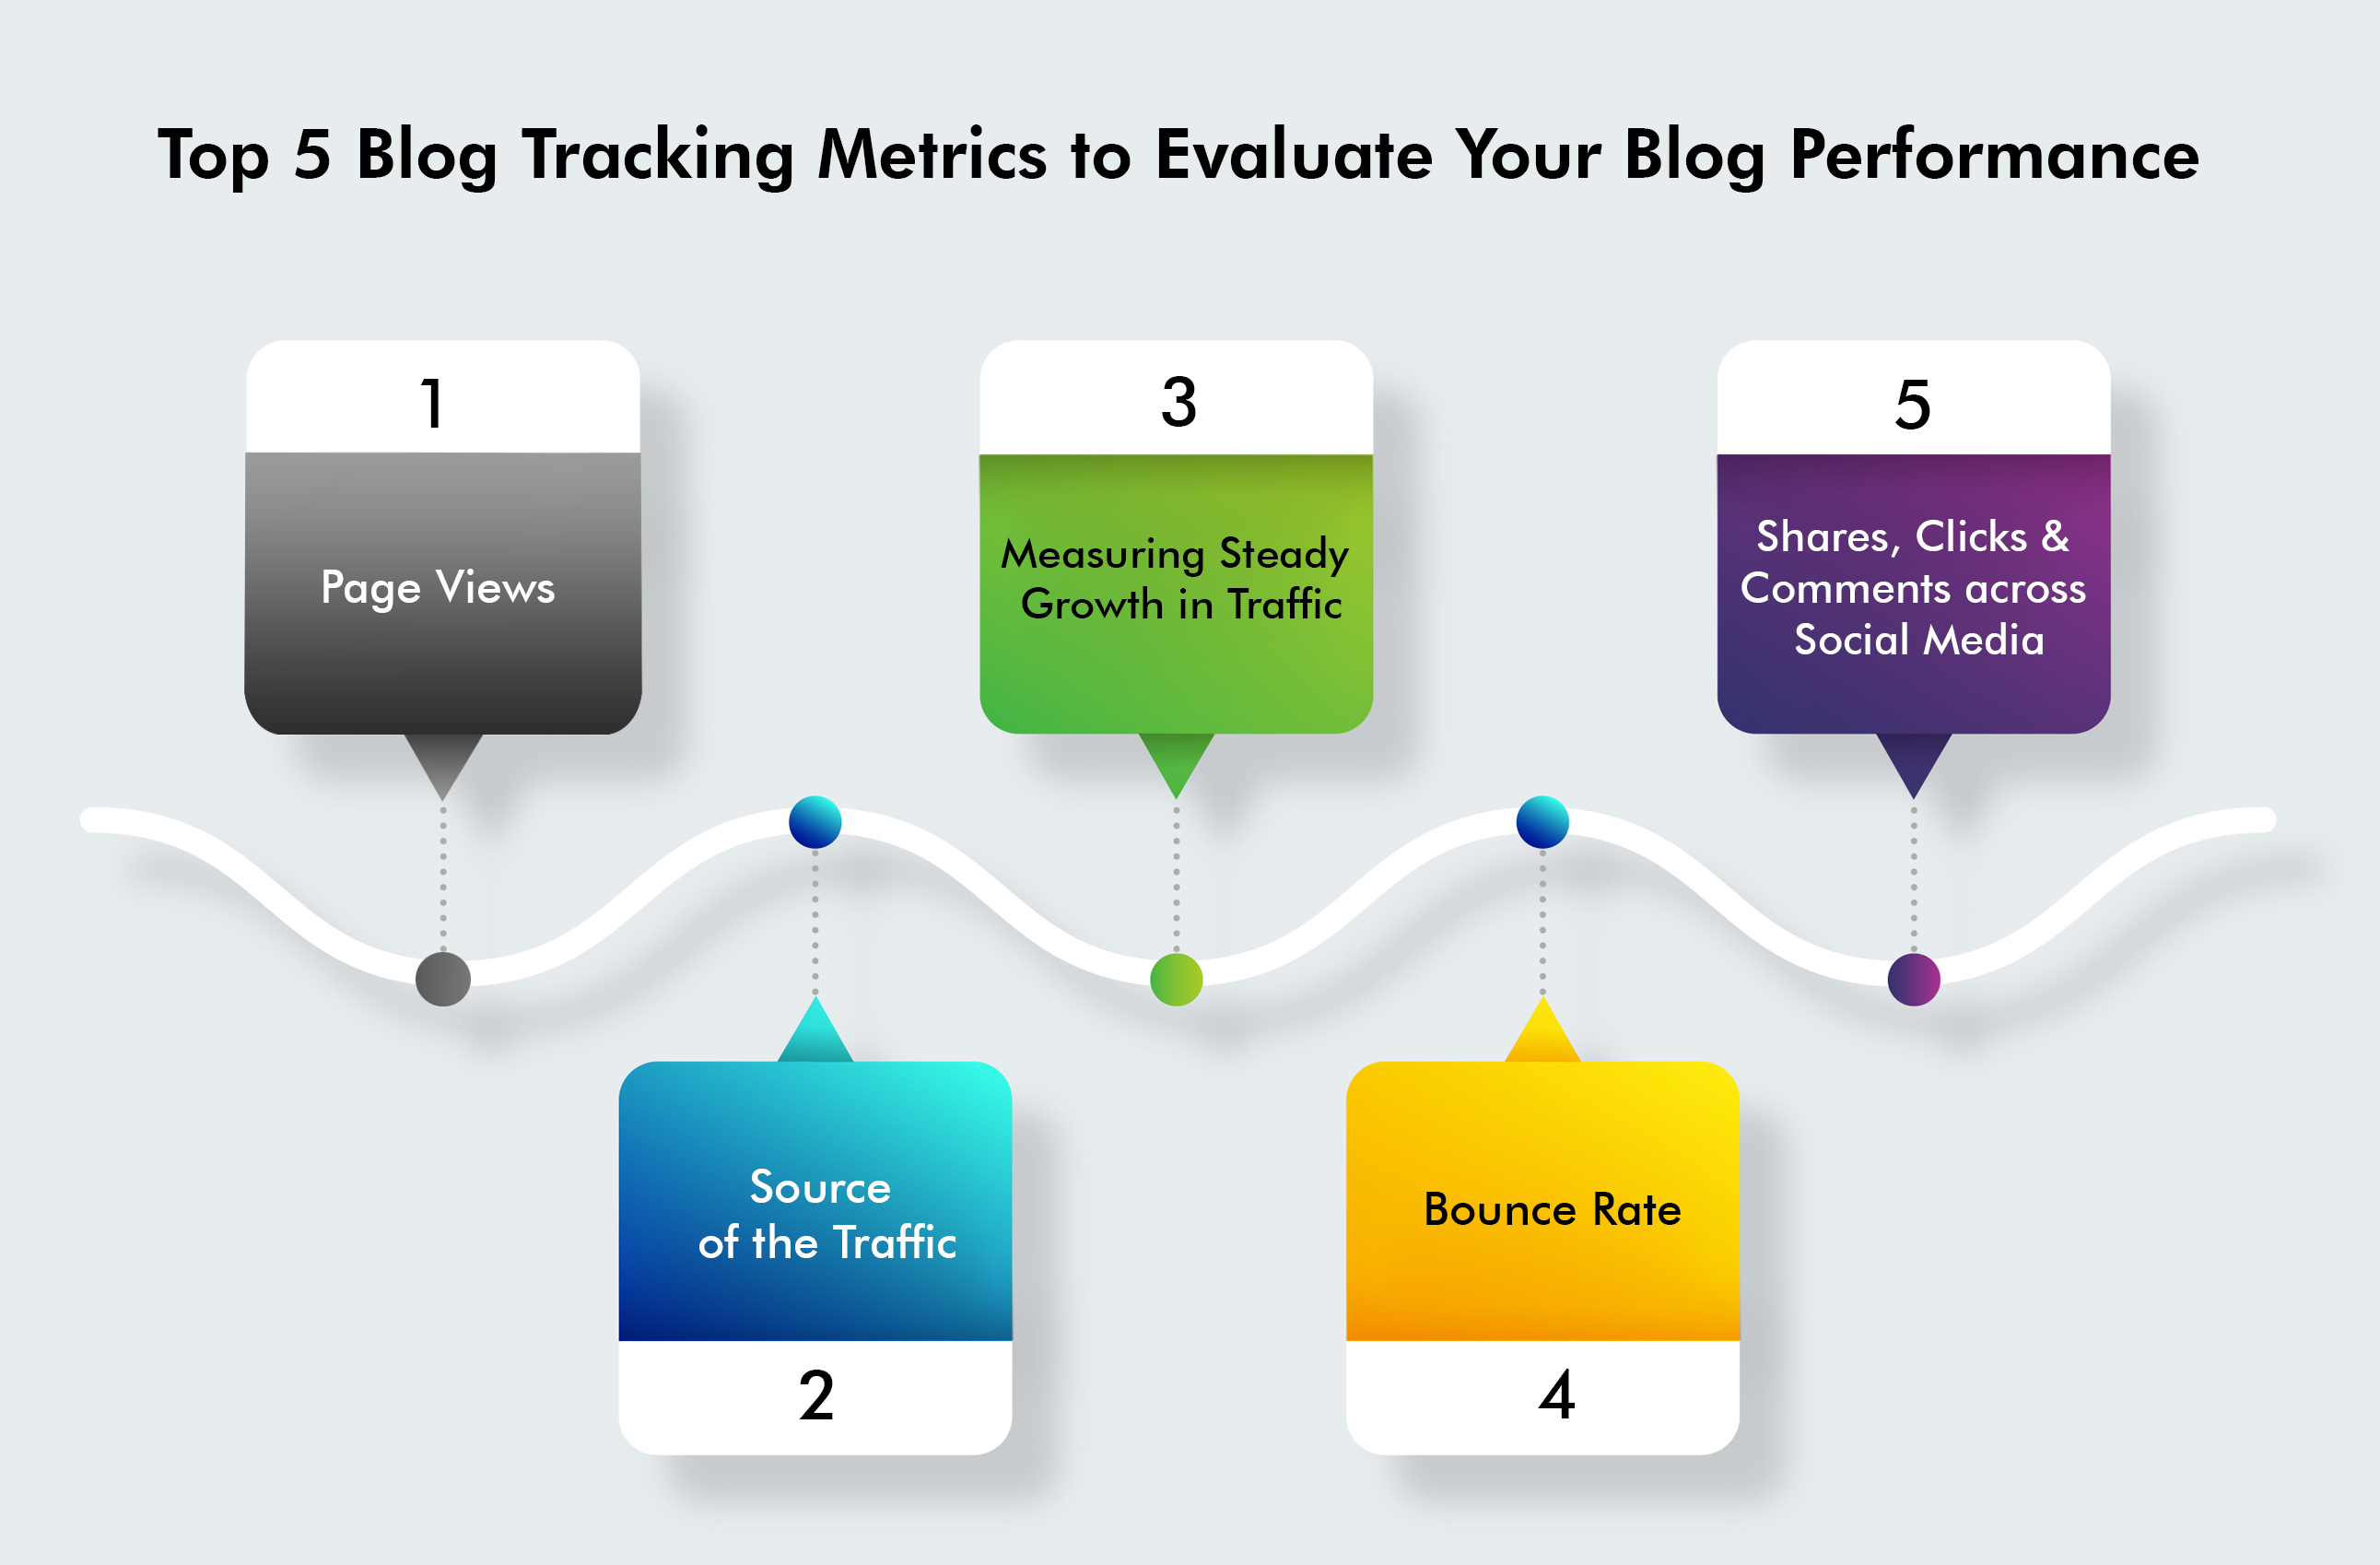 Top 5 Blog Tracking Metrics to Evaluate Your Blog Performance